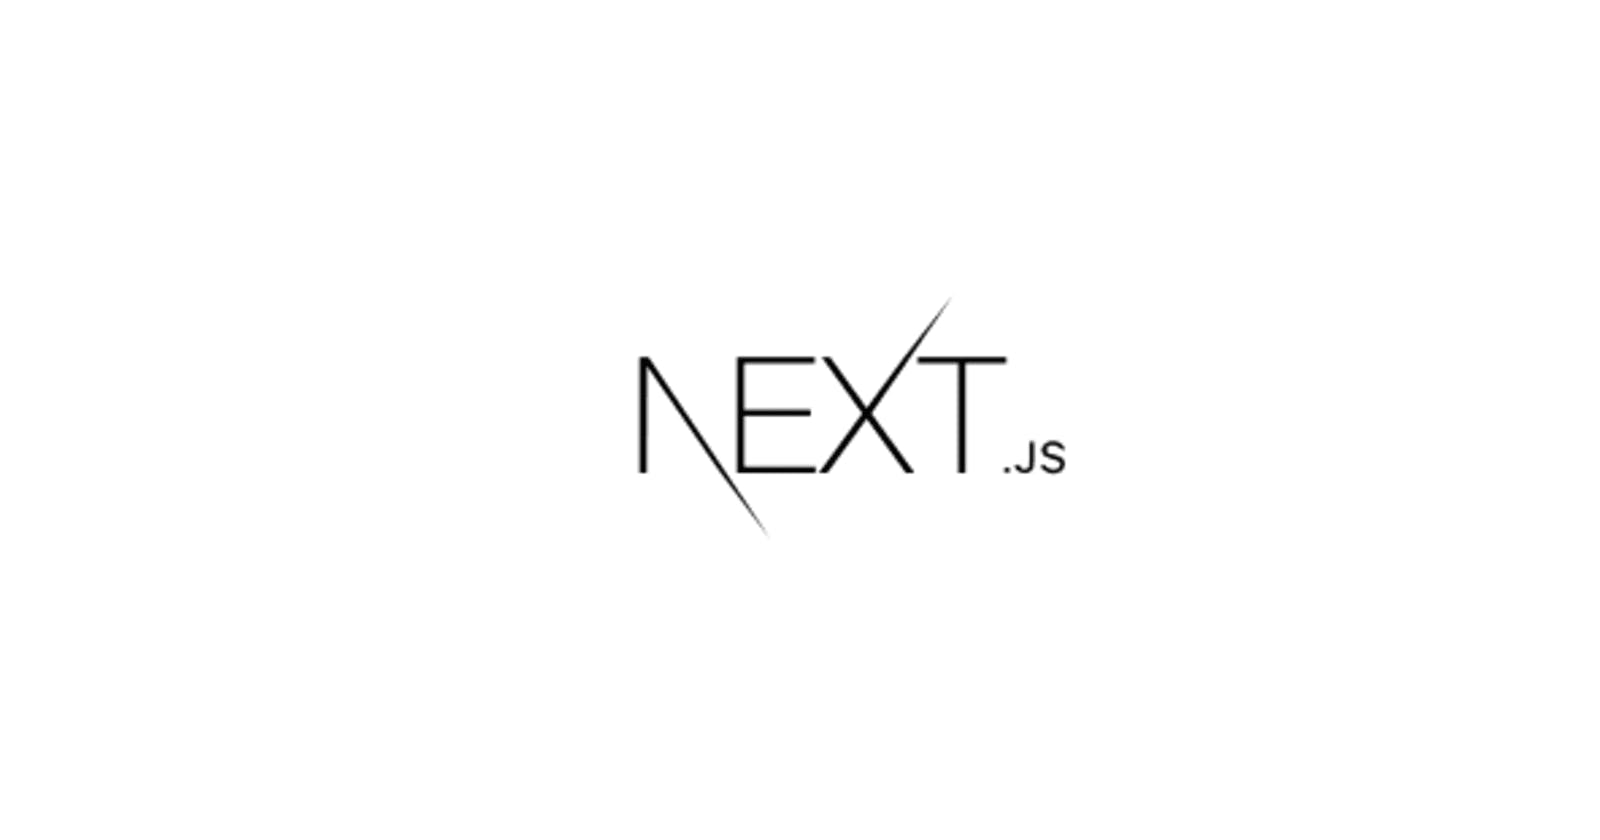 How I learned NextJs in a day